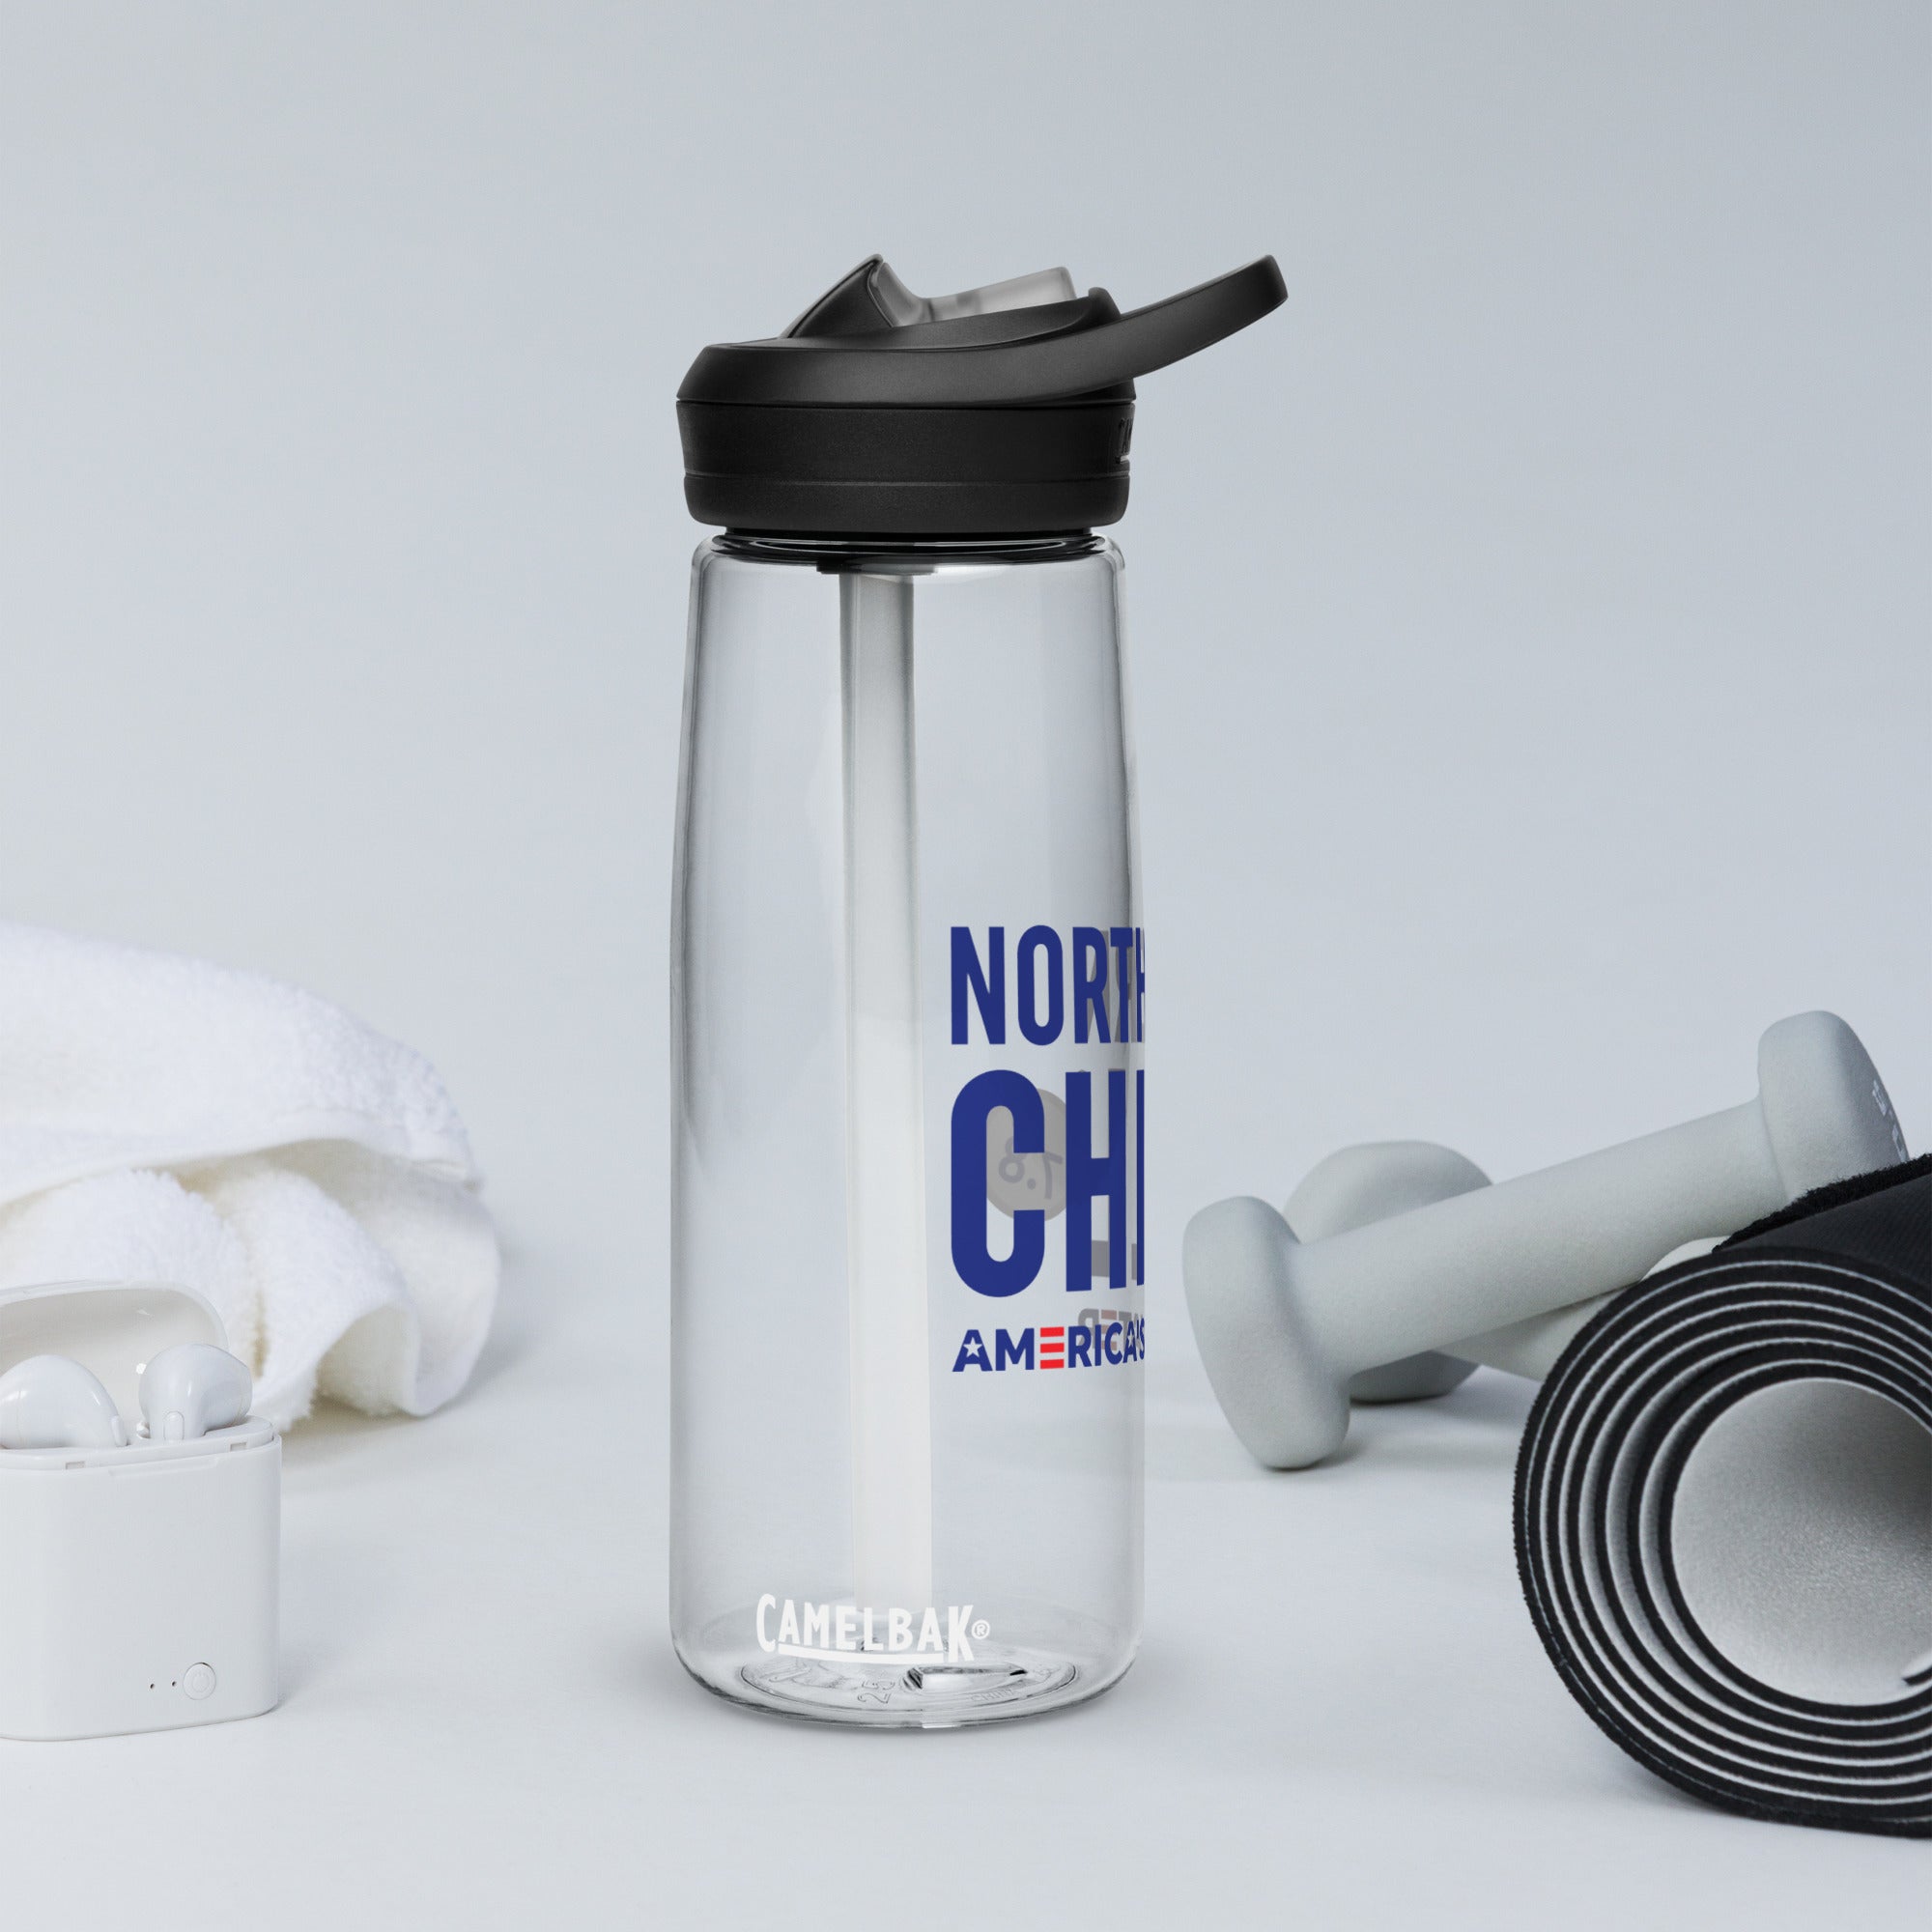 Northern Chill Sports water bottle